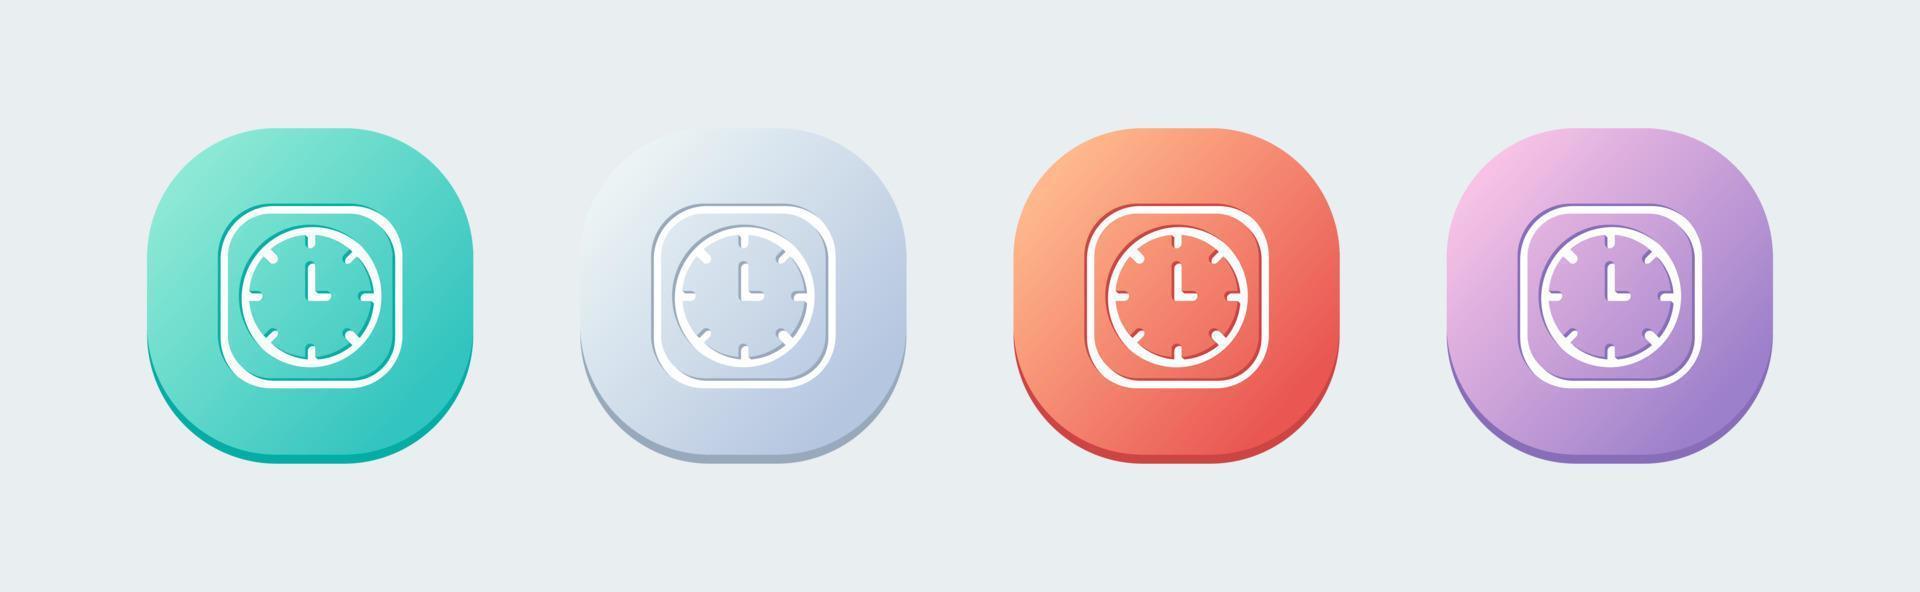 Clock line icon in flat design style. Time signs vector illustration